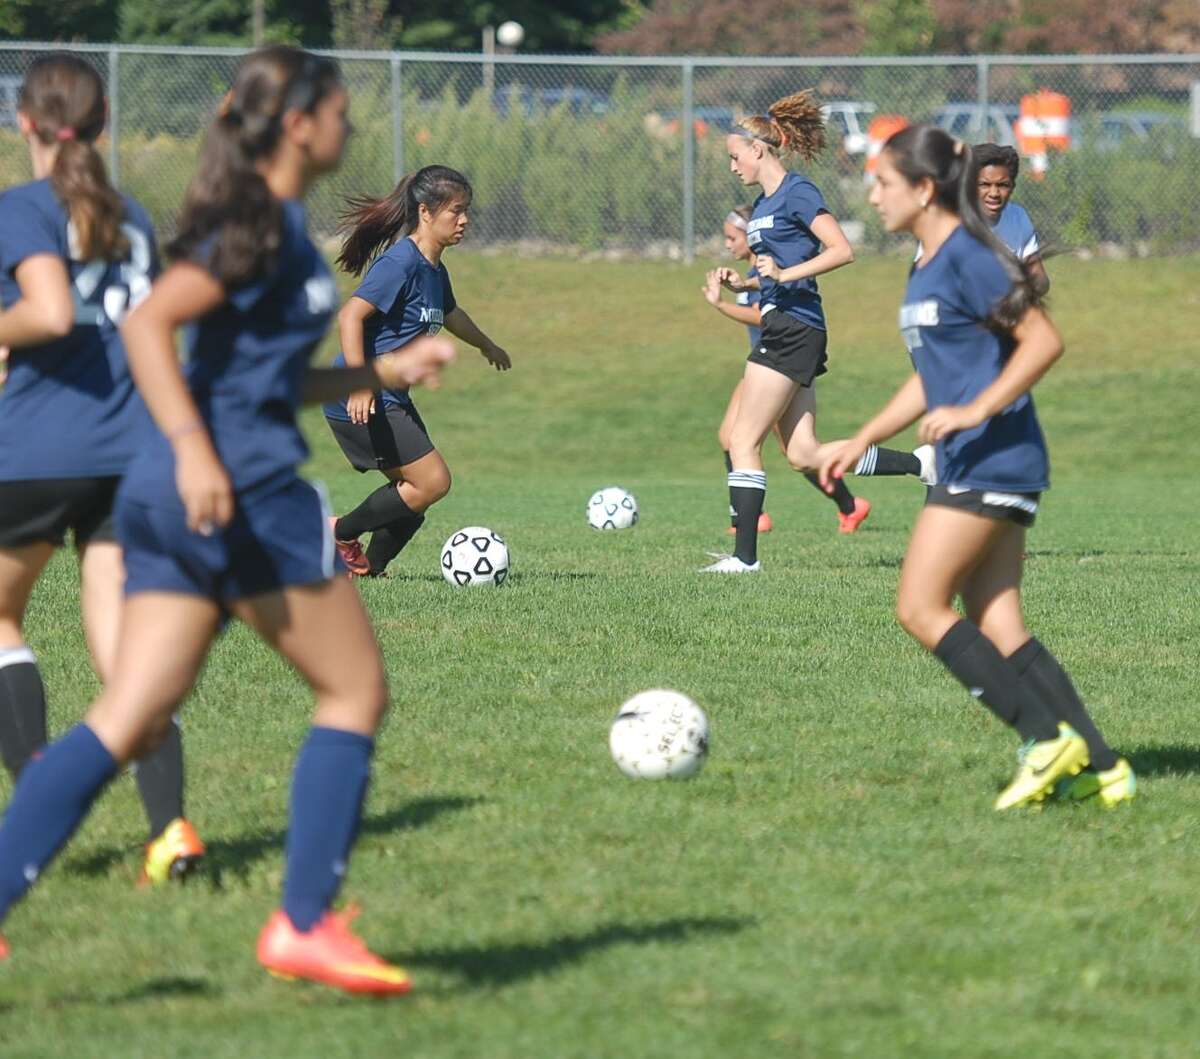 The Notre-Dame Fairfield girls’ soccer team during practice last week. Photo by Mary Albl